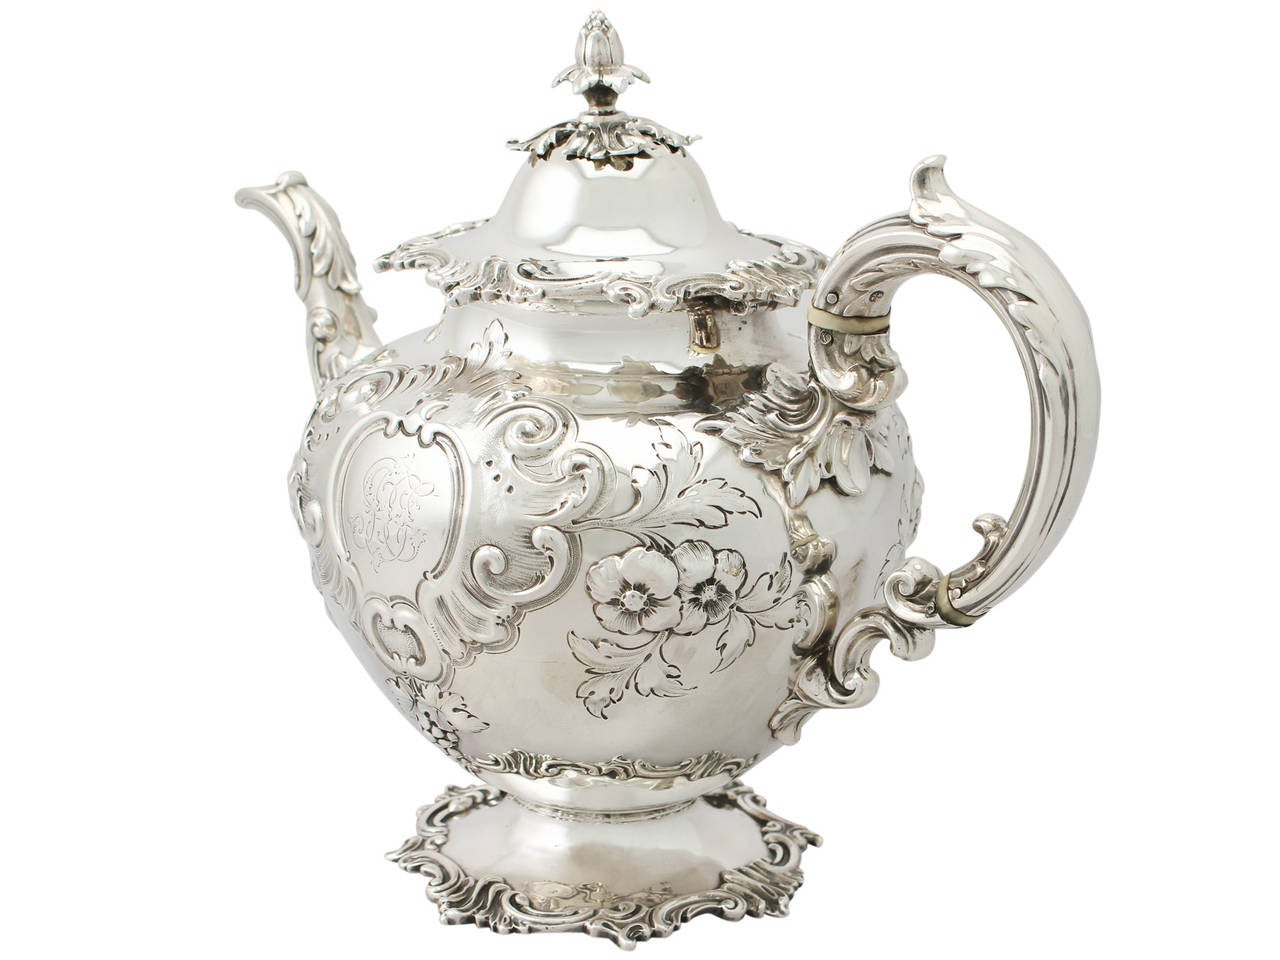 An exceptional, fine and impressive antique Victorian English sterling silver teapot made by Edward and John Barnard, an addition to our range of collectable silver teaware.

This exceptional antique Victorian sterling silver teapot has a circular